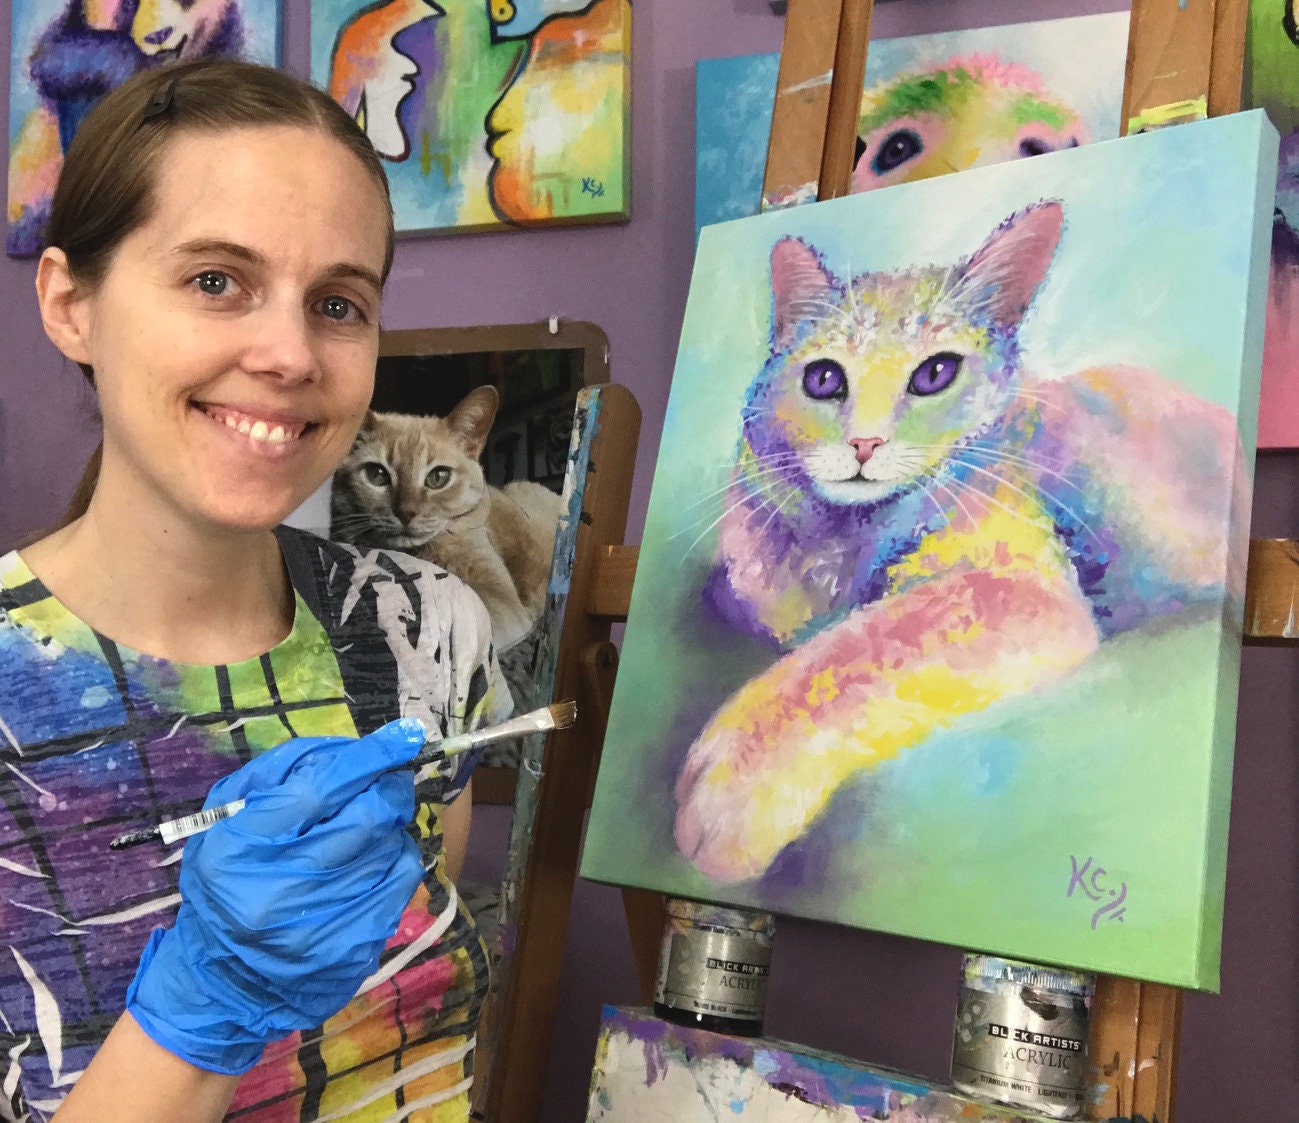 Pastel Cat Print - Cat Painting. Cat Art on CANVAS or PAPER by Krystle Cole